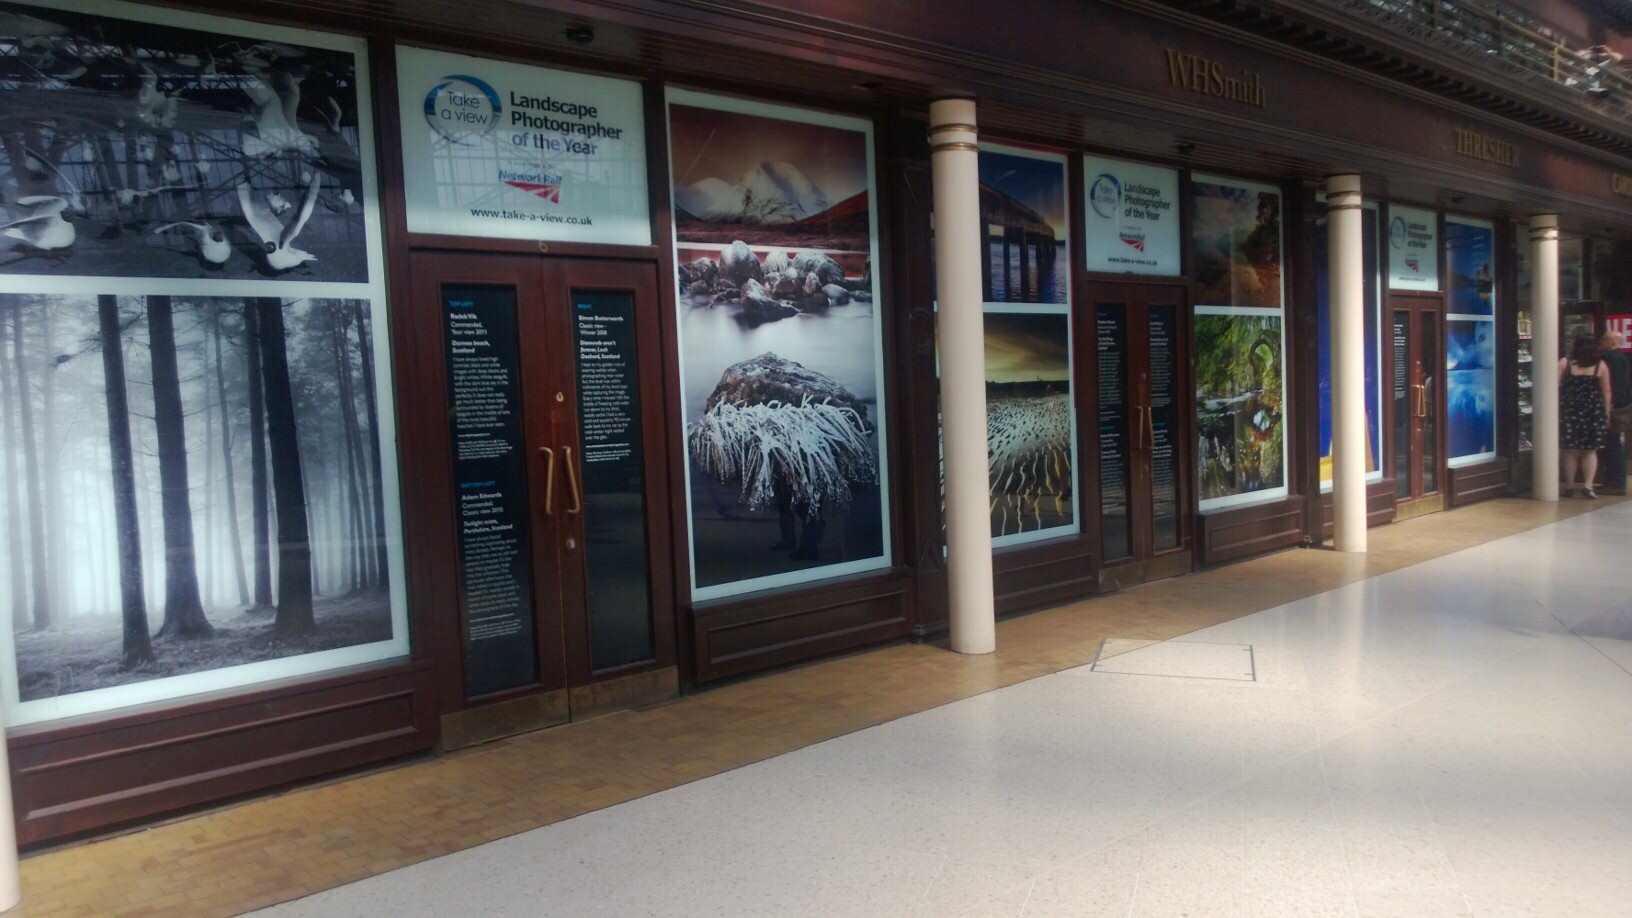 Glasgow Central Station Exhibition - Image courtesy of Network Rail